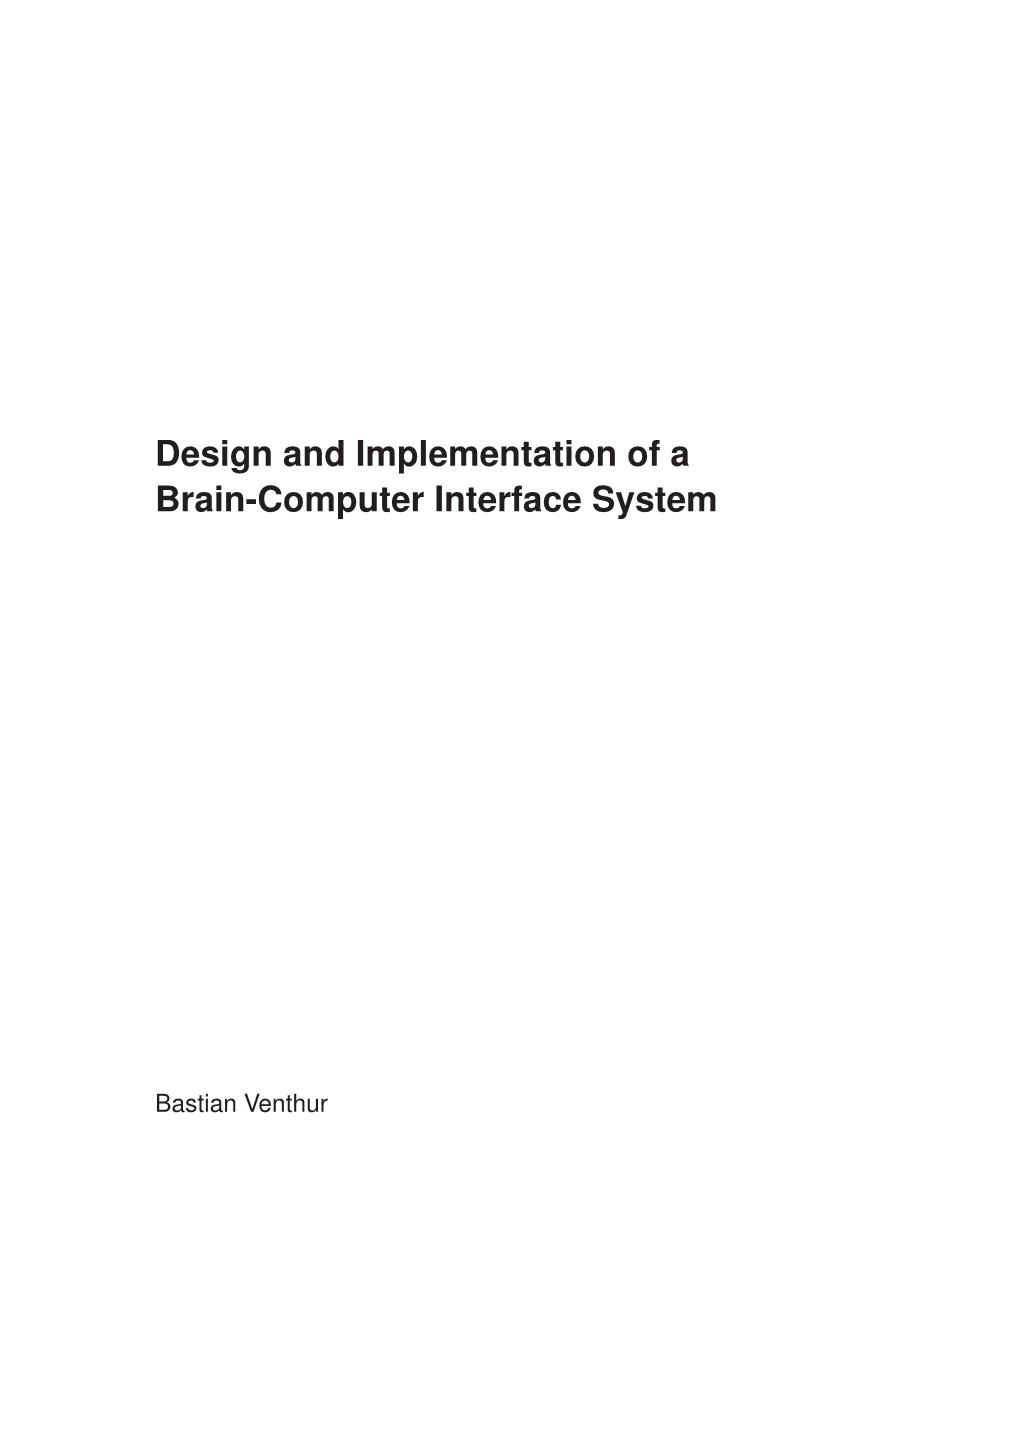 Design and Implementation of a Brain-Computer Interface System